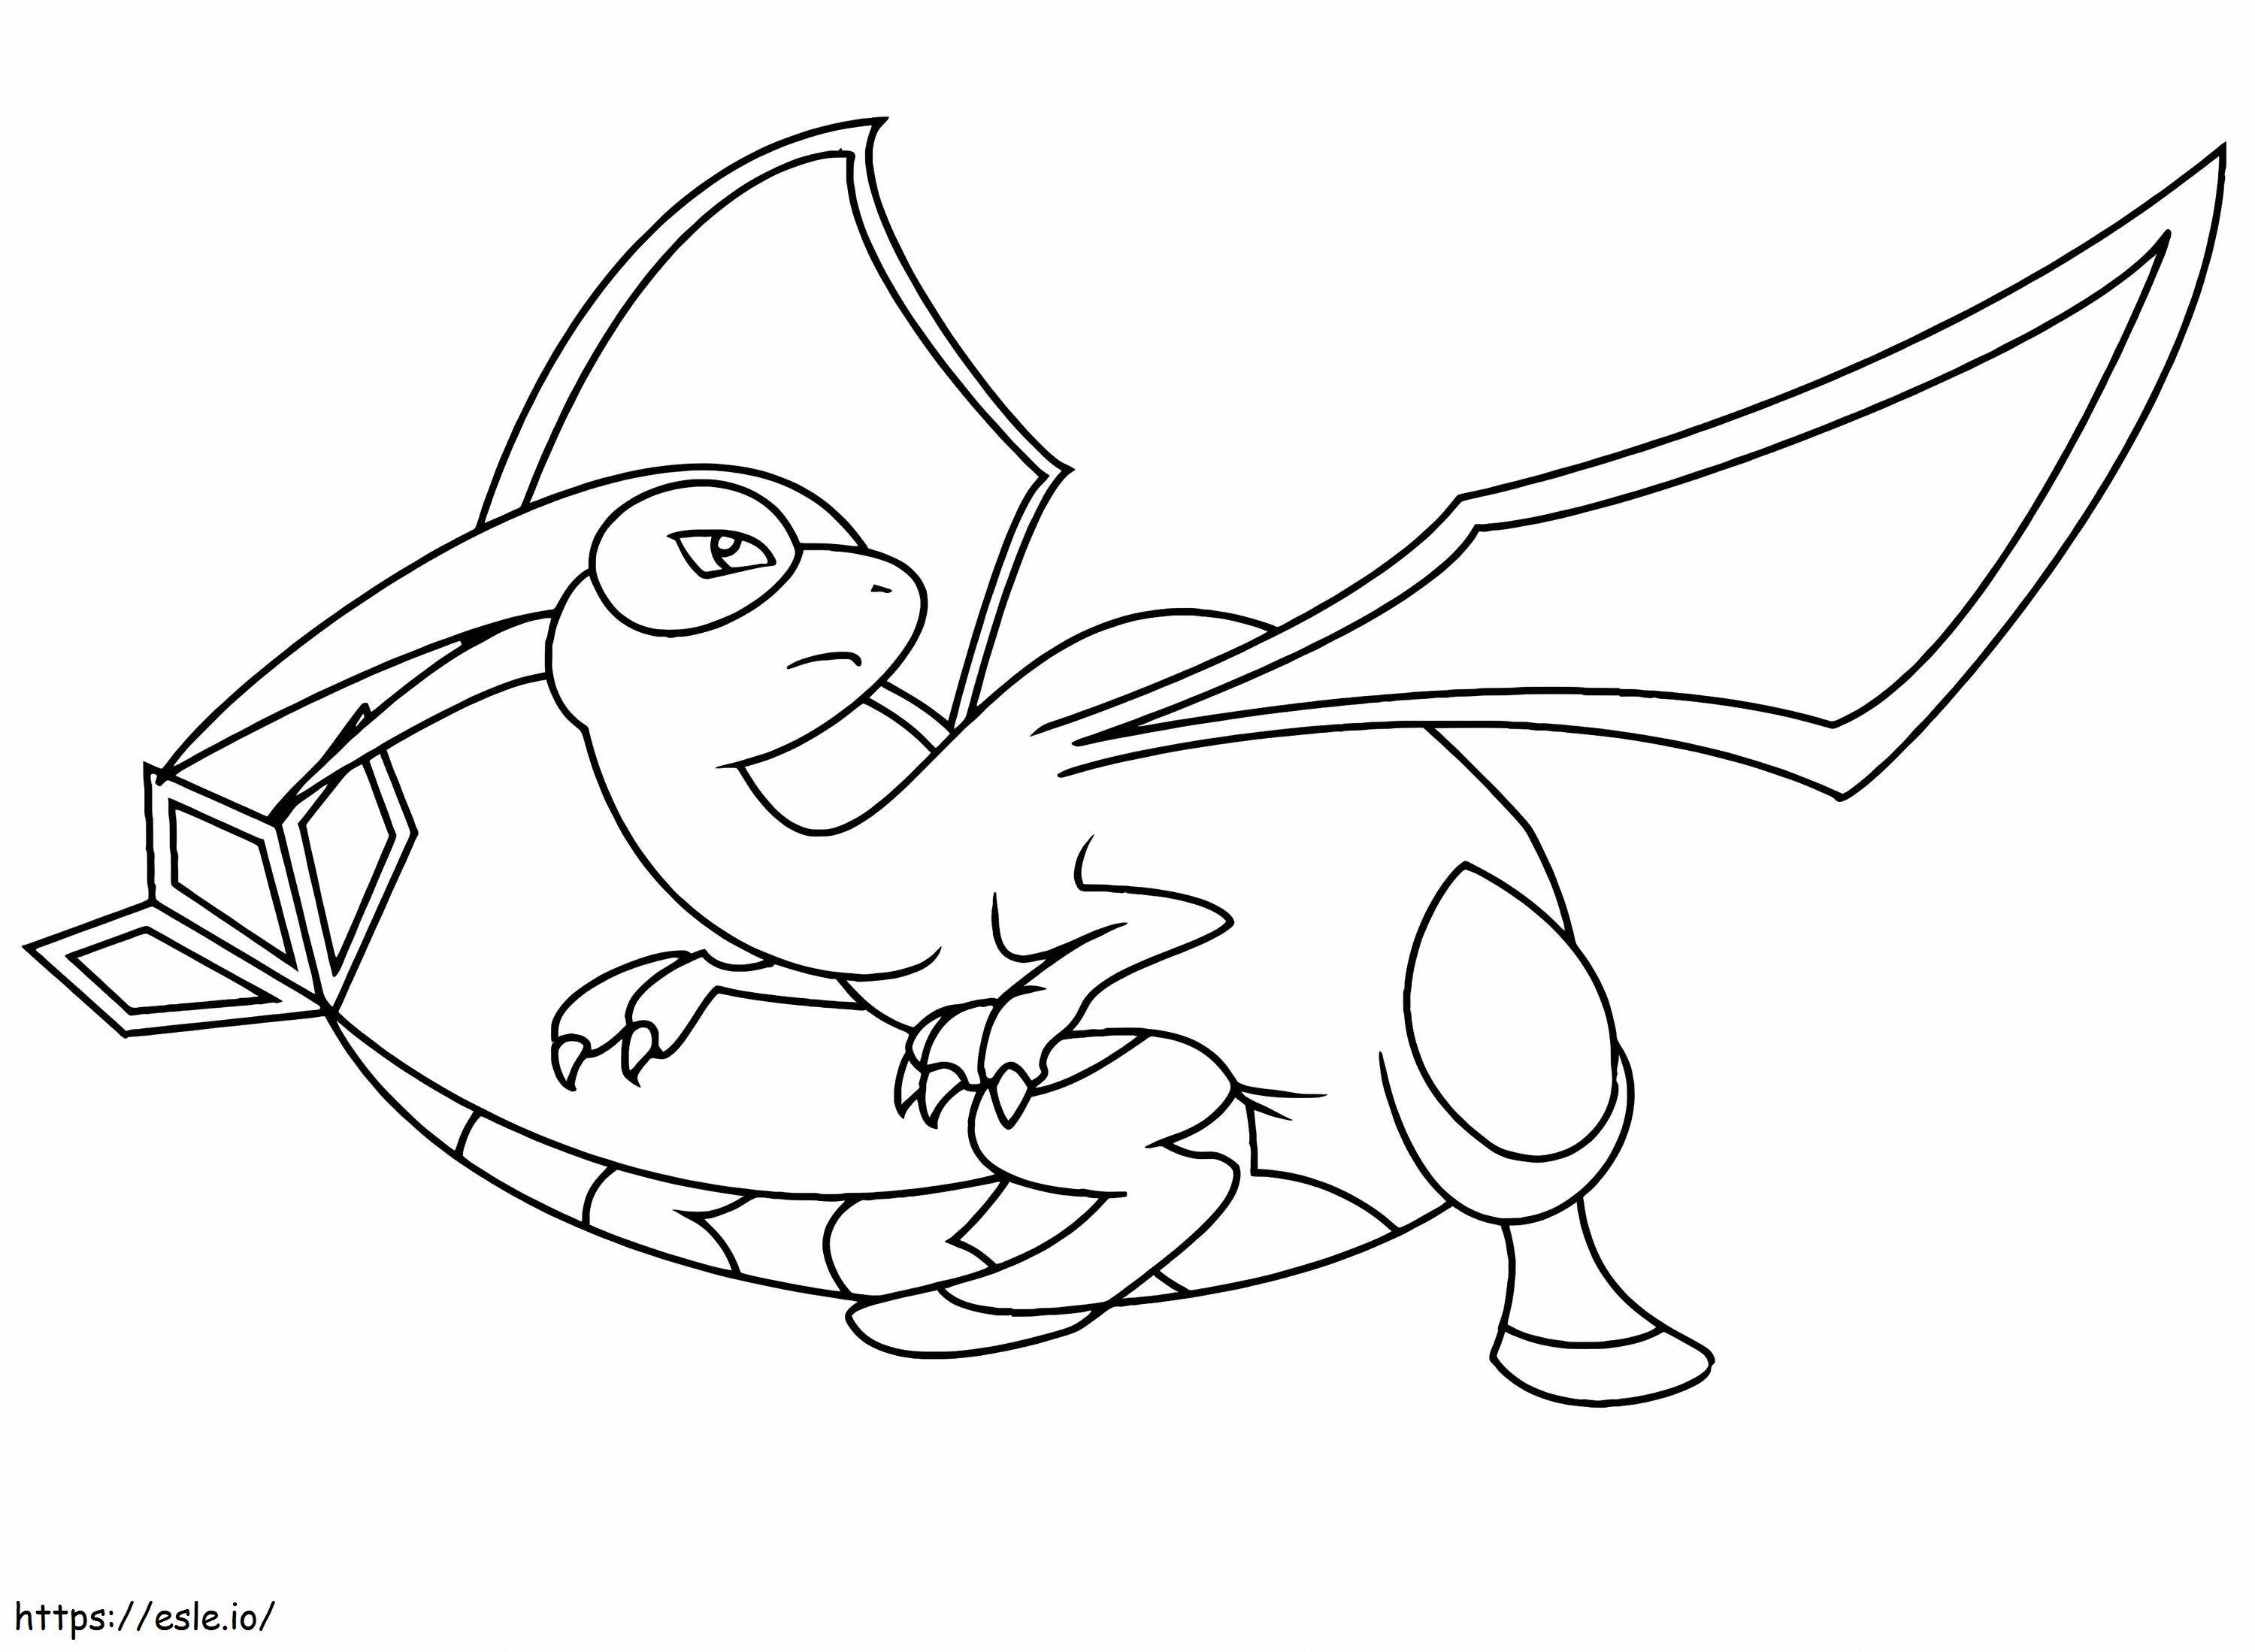 Cool Flygon coloring page